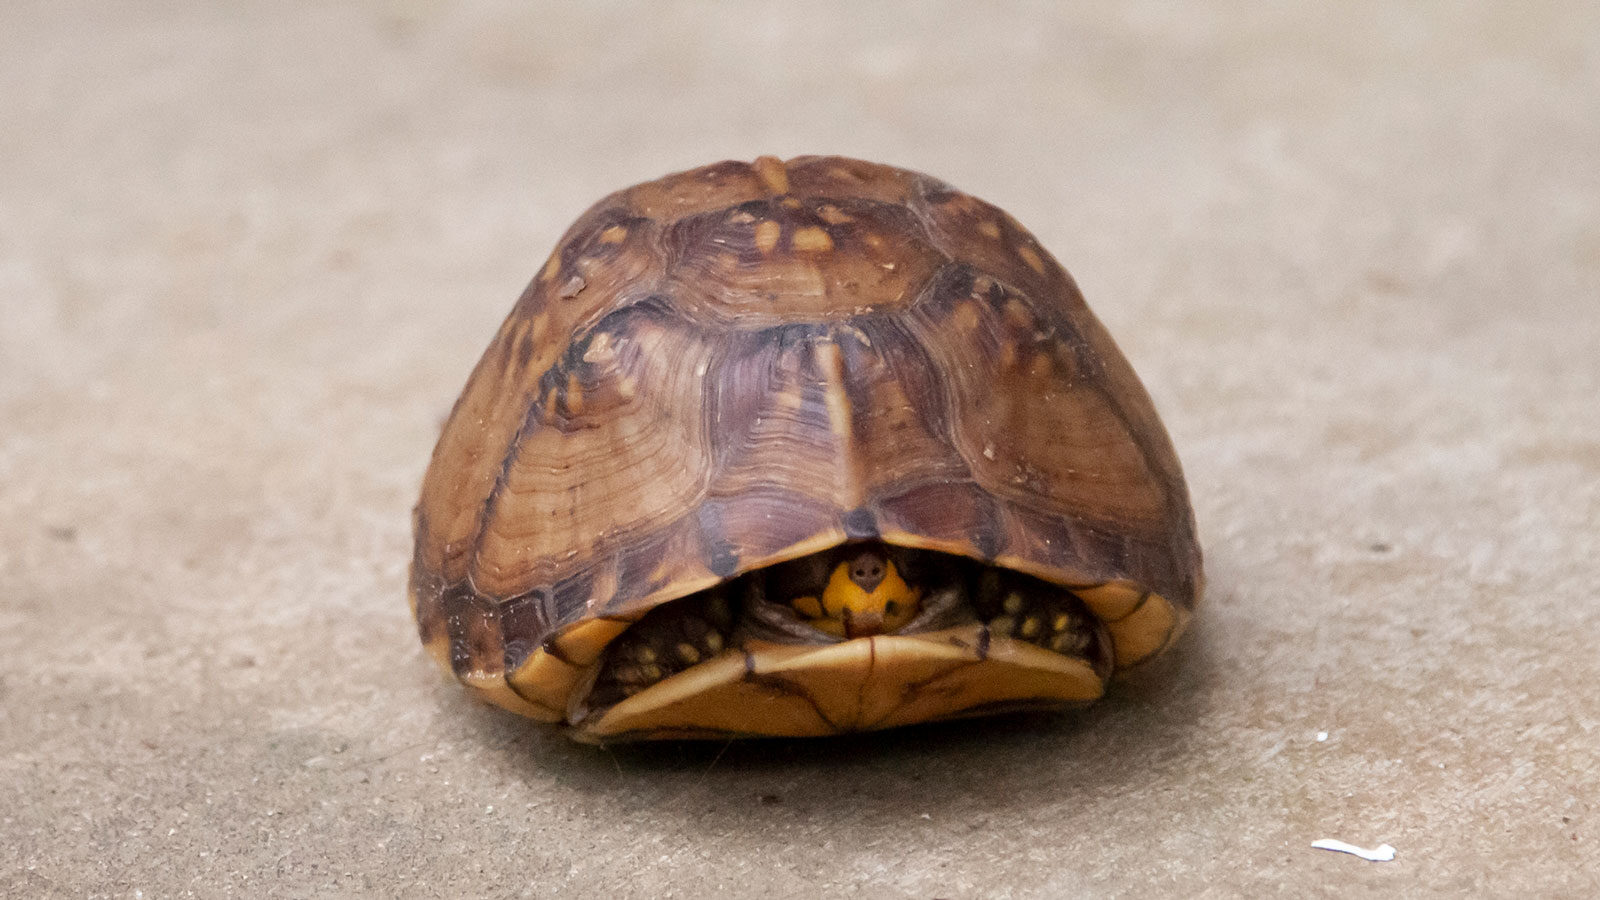 Eastern box turtle in partially closed shell